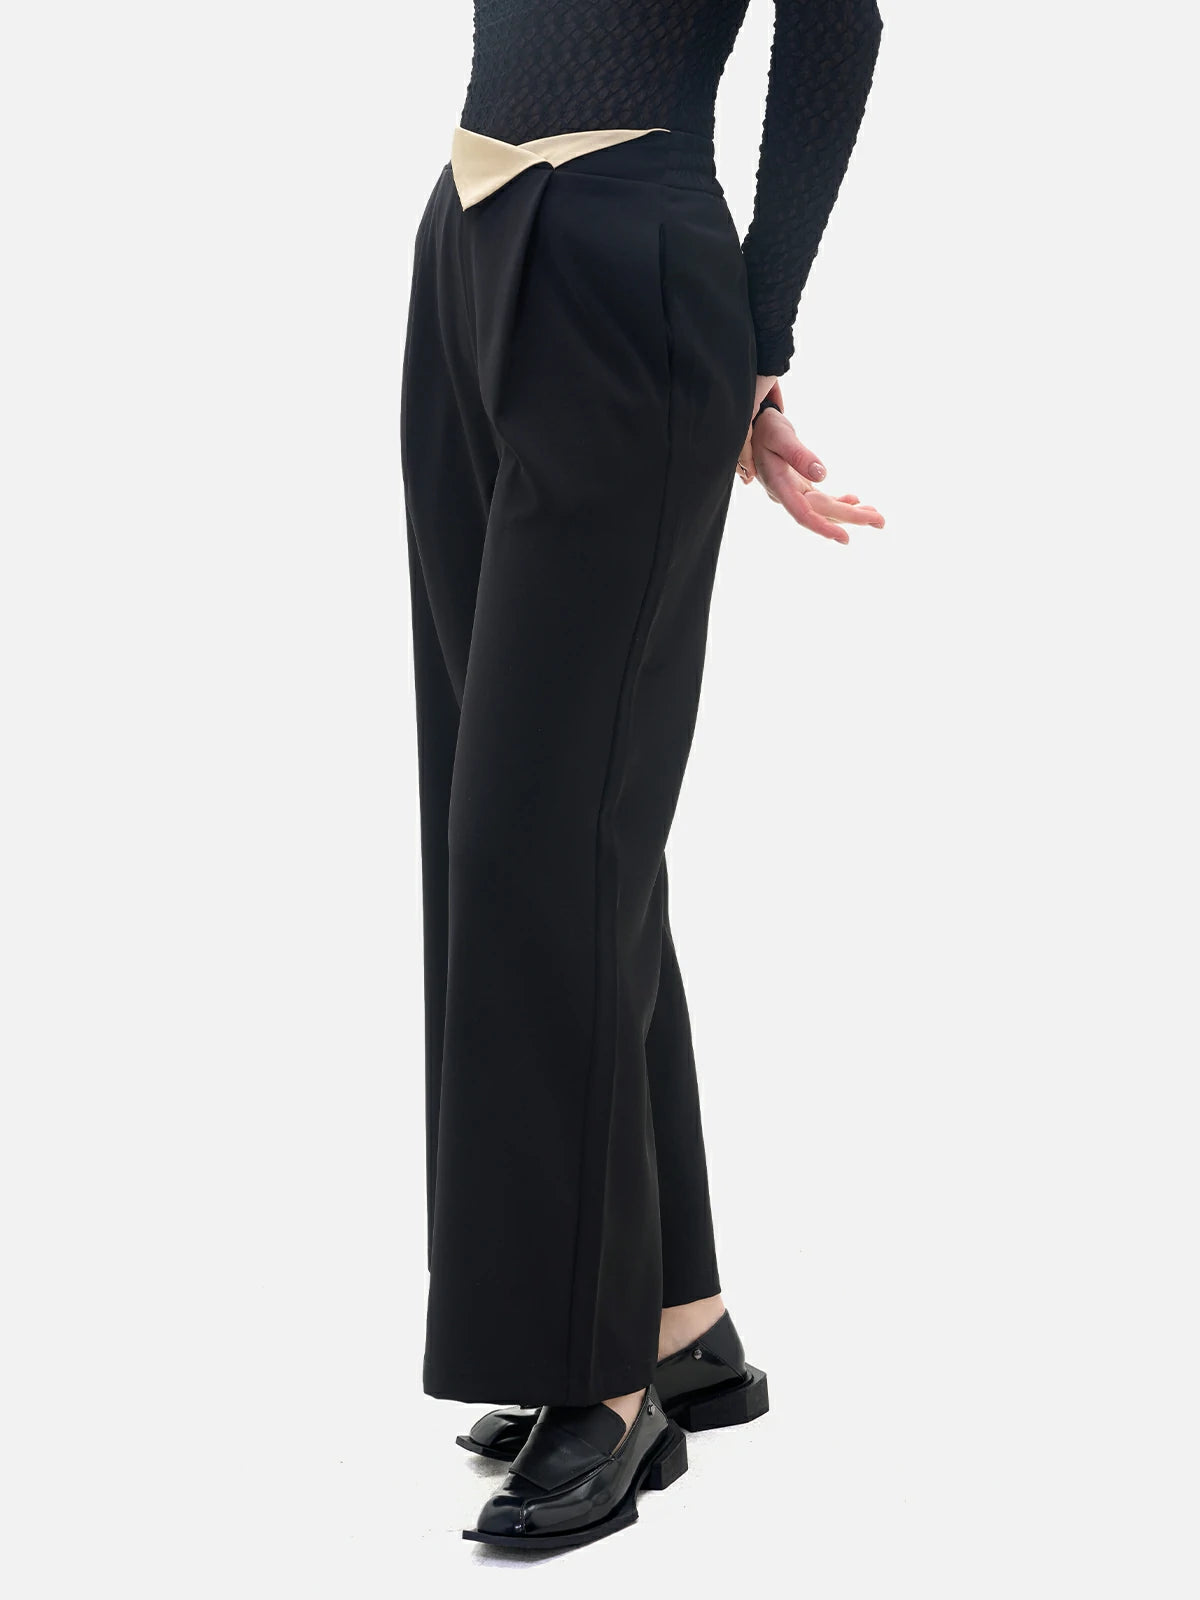 Comfortable loose trousers with a unique color-blocking flip at the waist, showcasing a casual and fashionable style